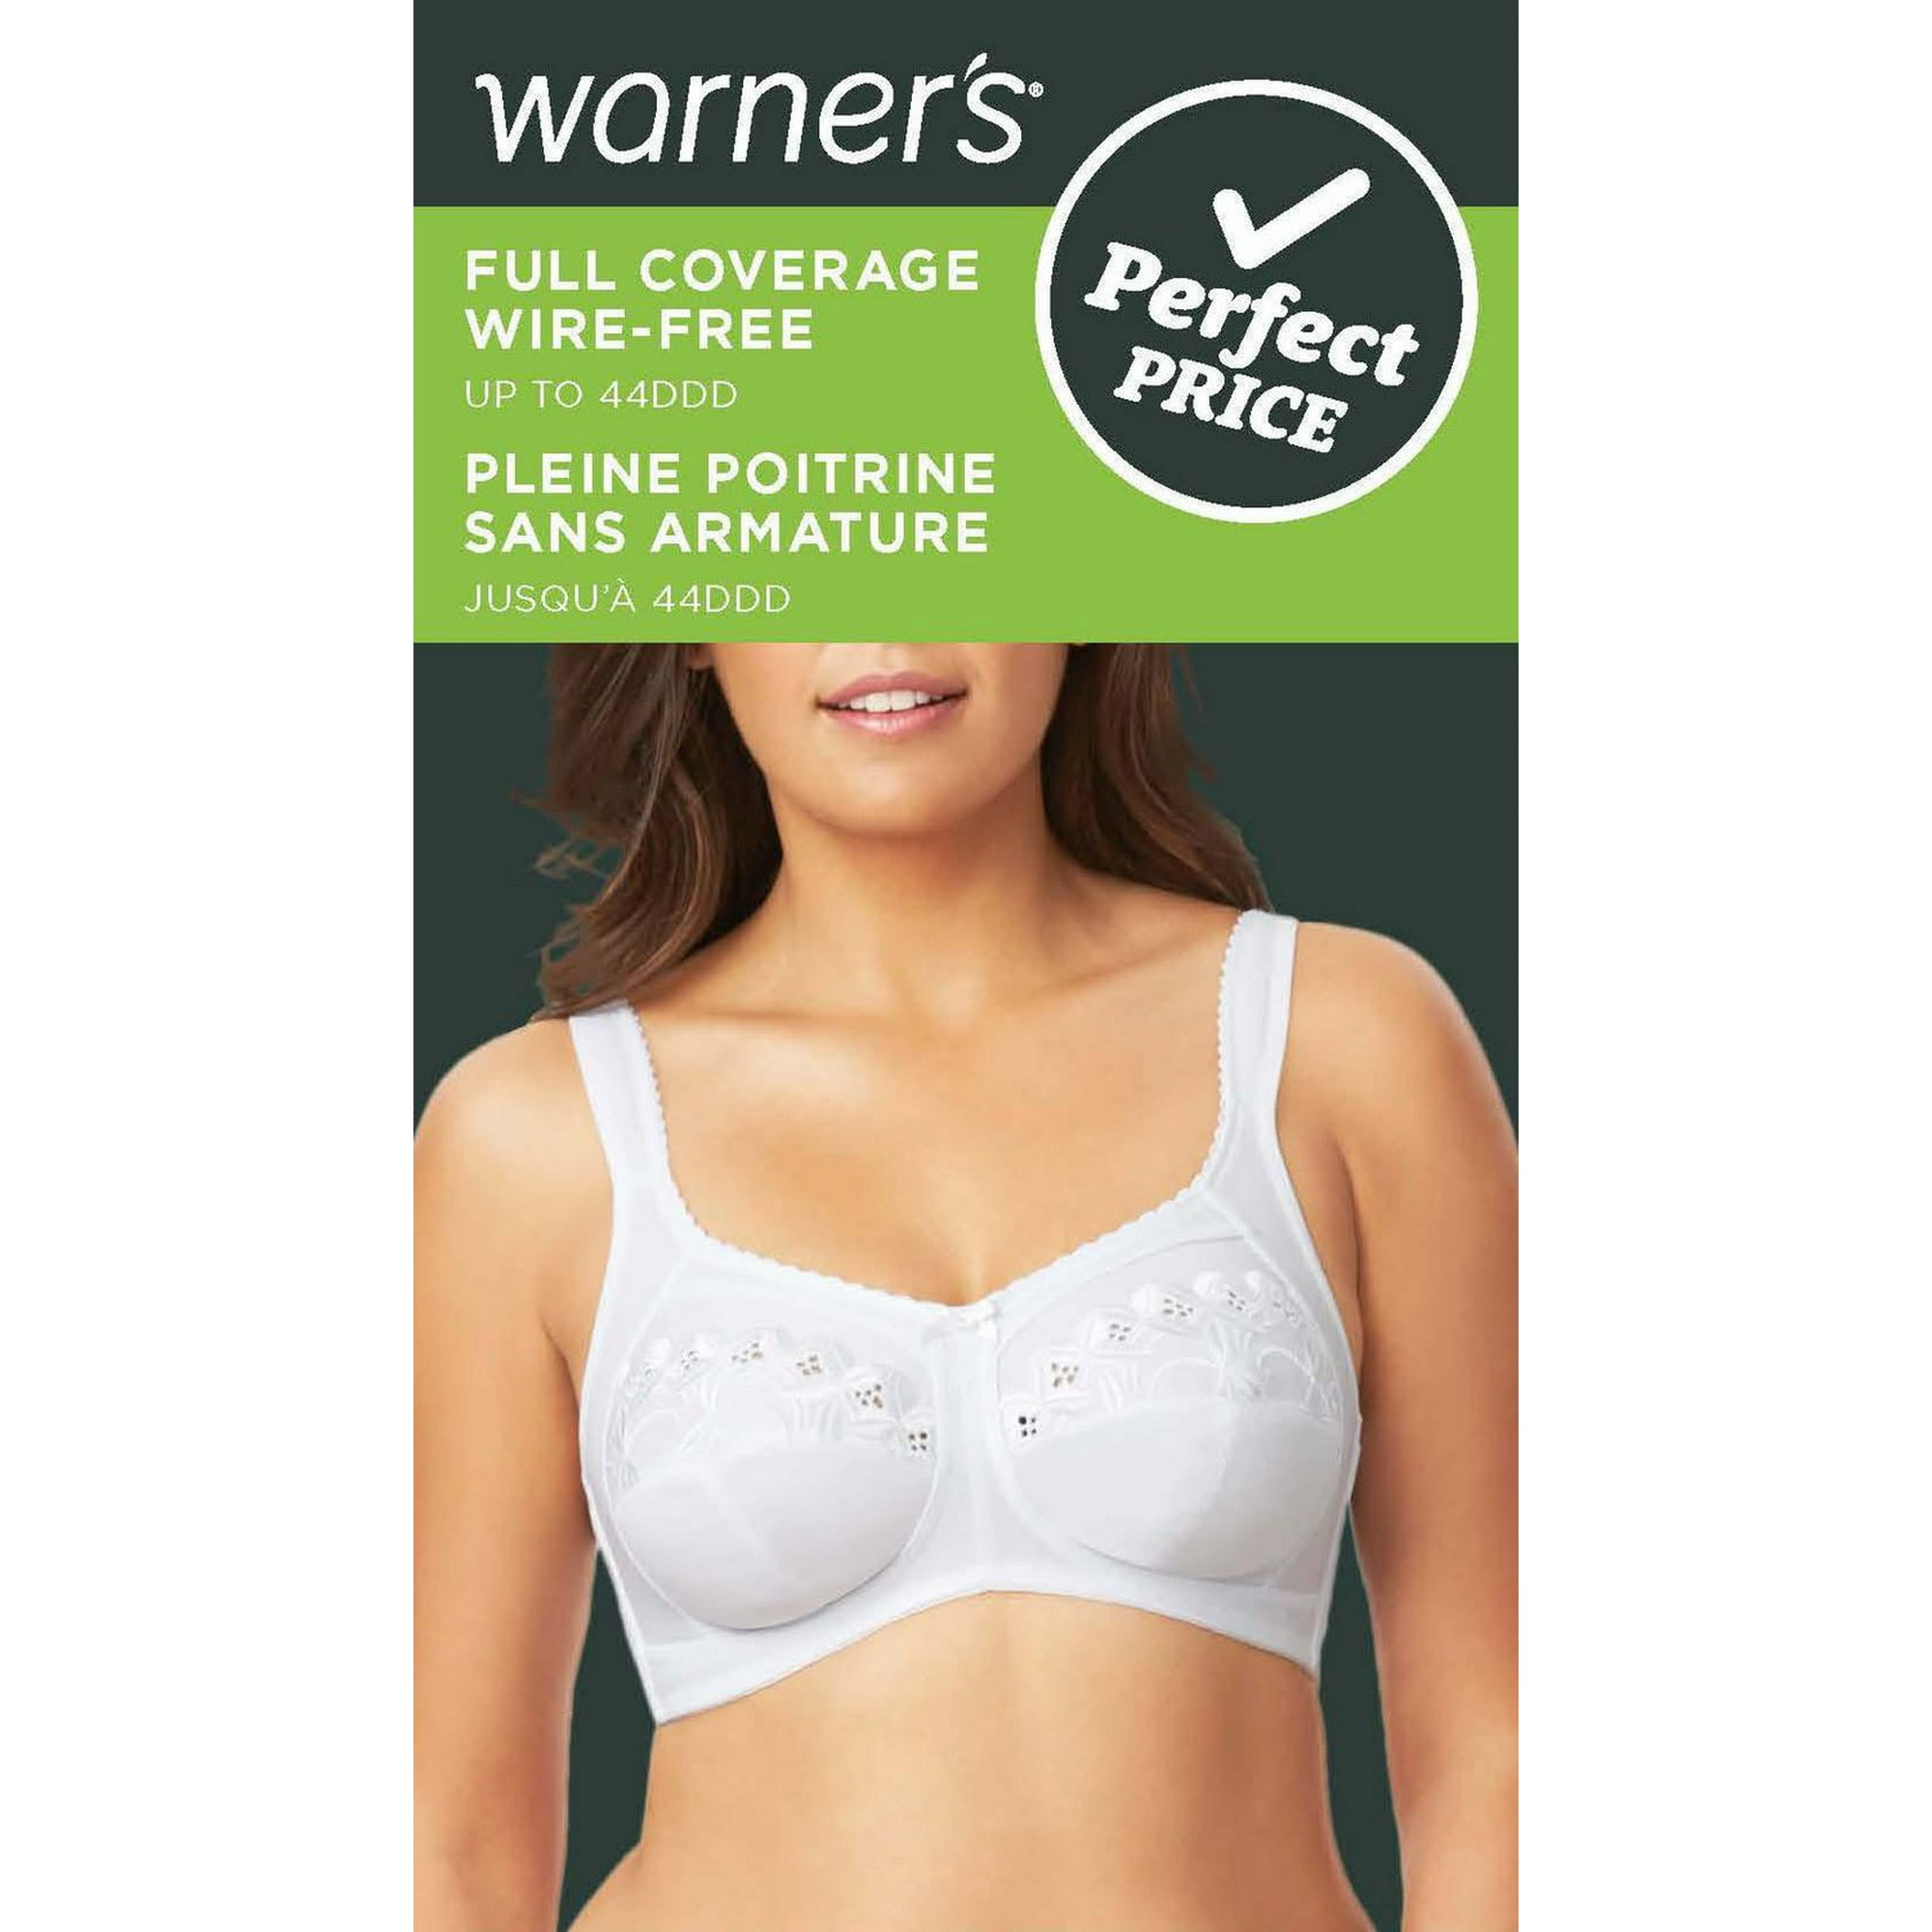 WARNERS WOMEN'S BLACK FULLY PADDED FULL COVERAGE BRA SIZE 36 D EXCEL COND